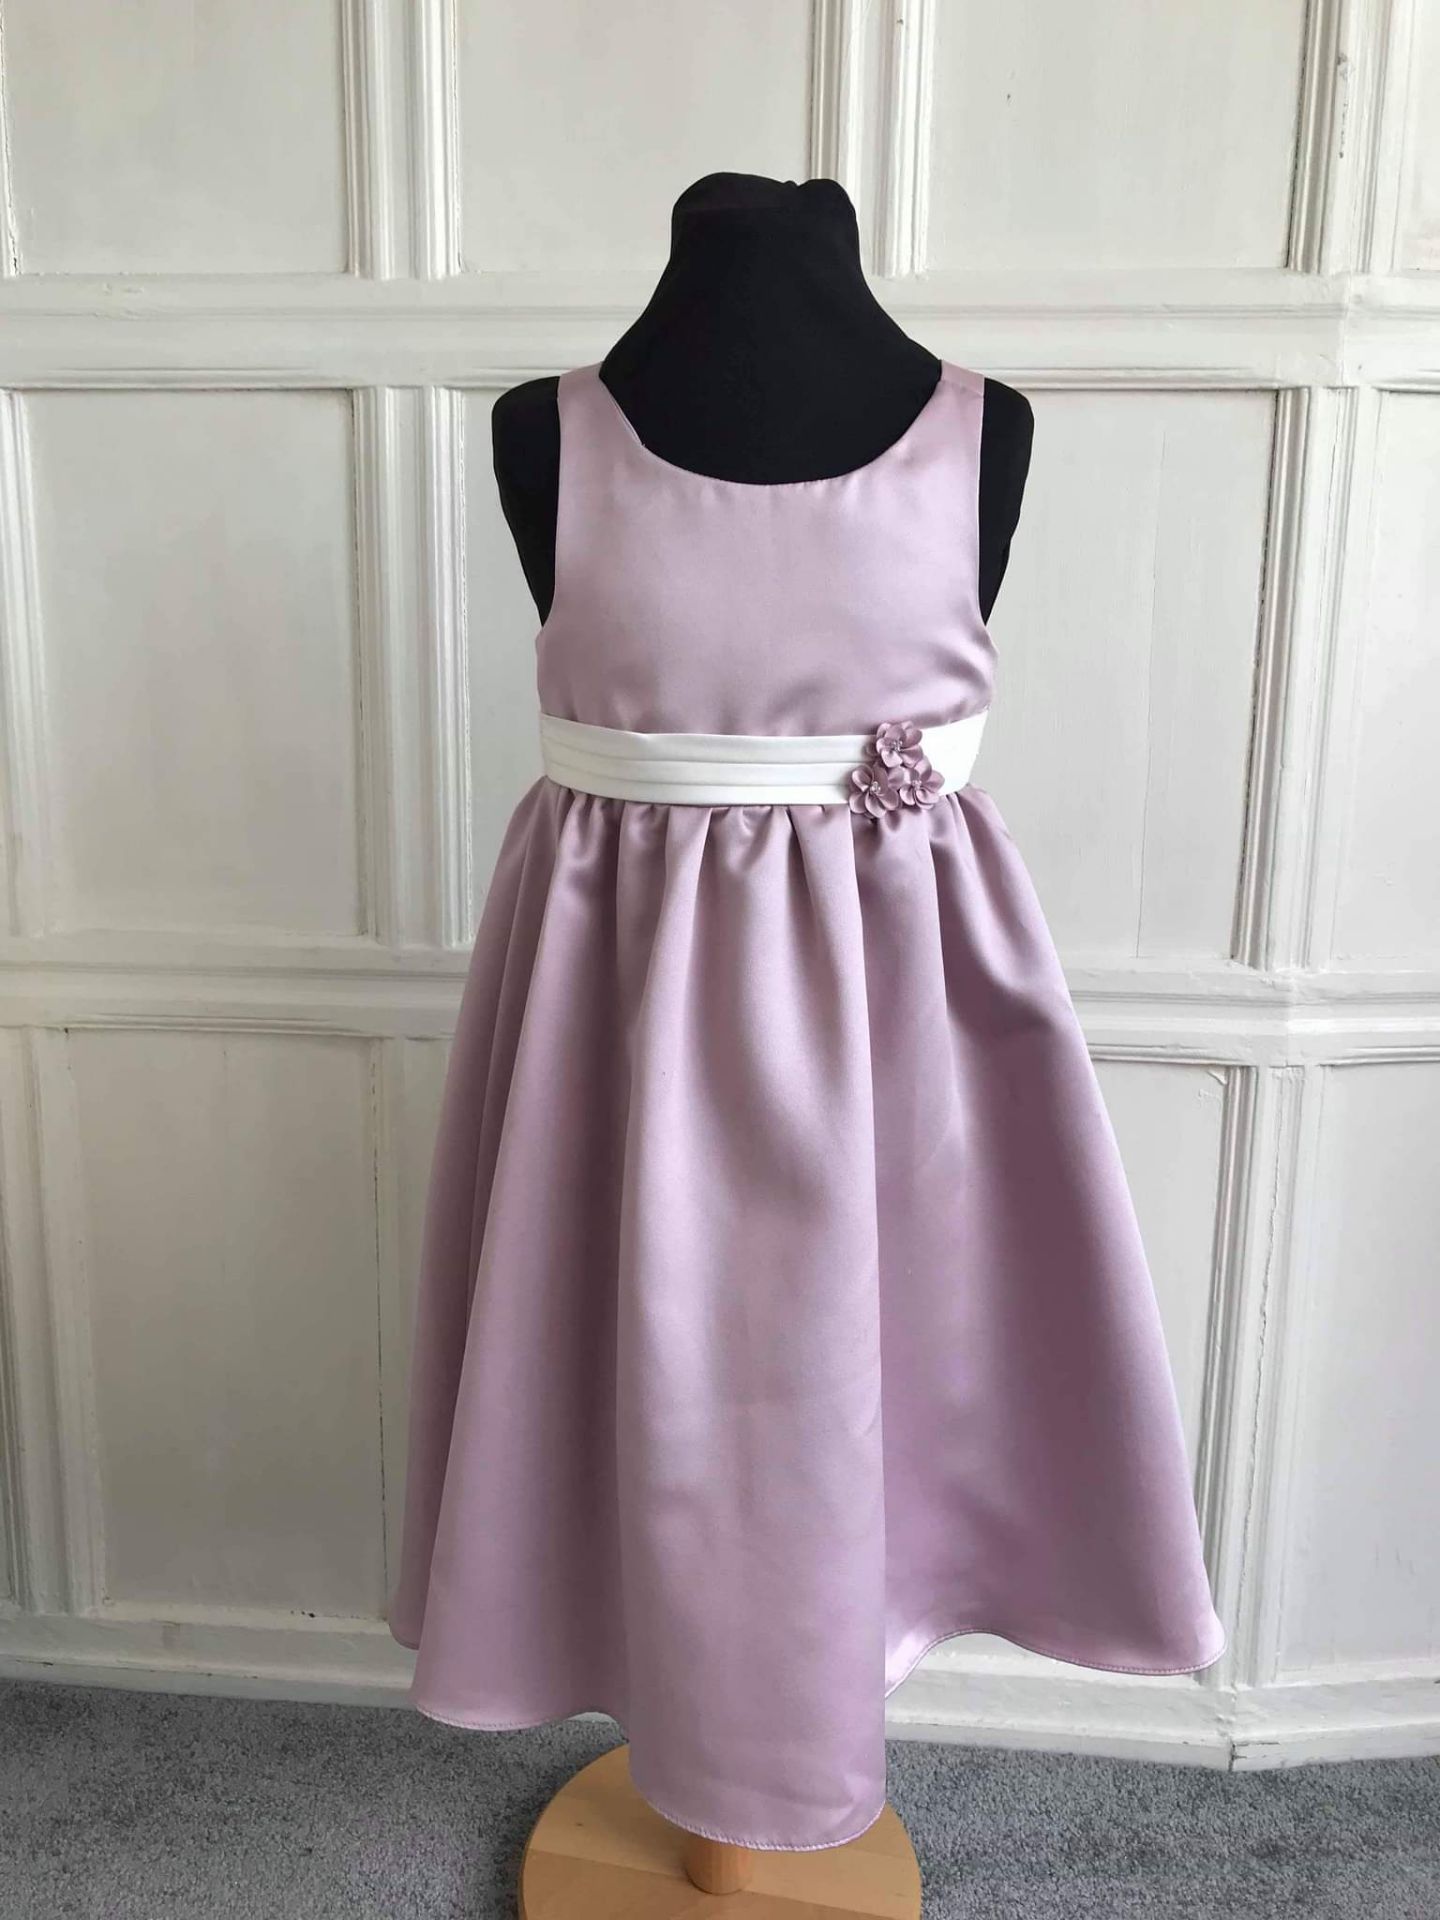 Children's Dresses, Mixed Collection of 12 Dresses